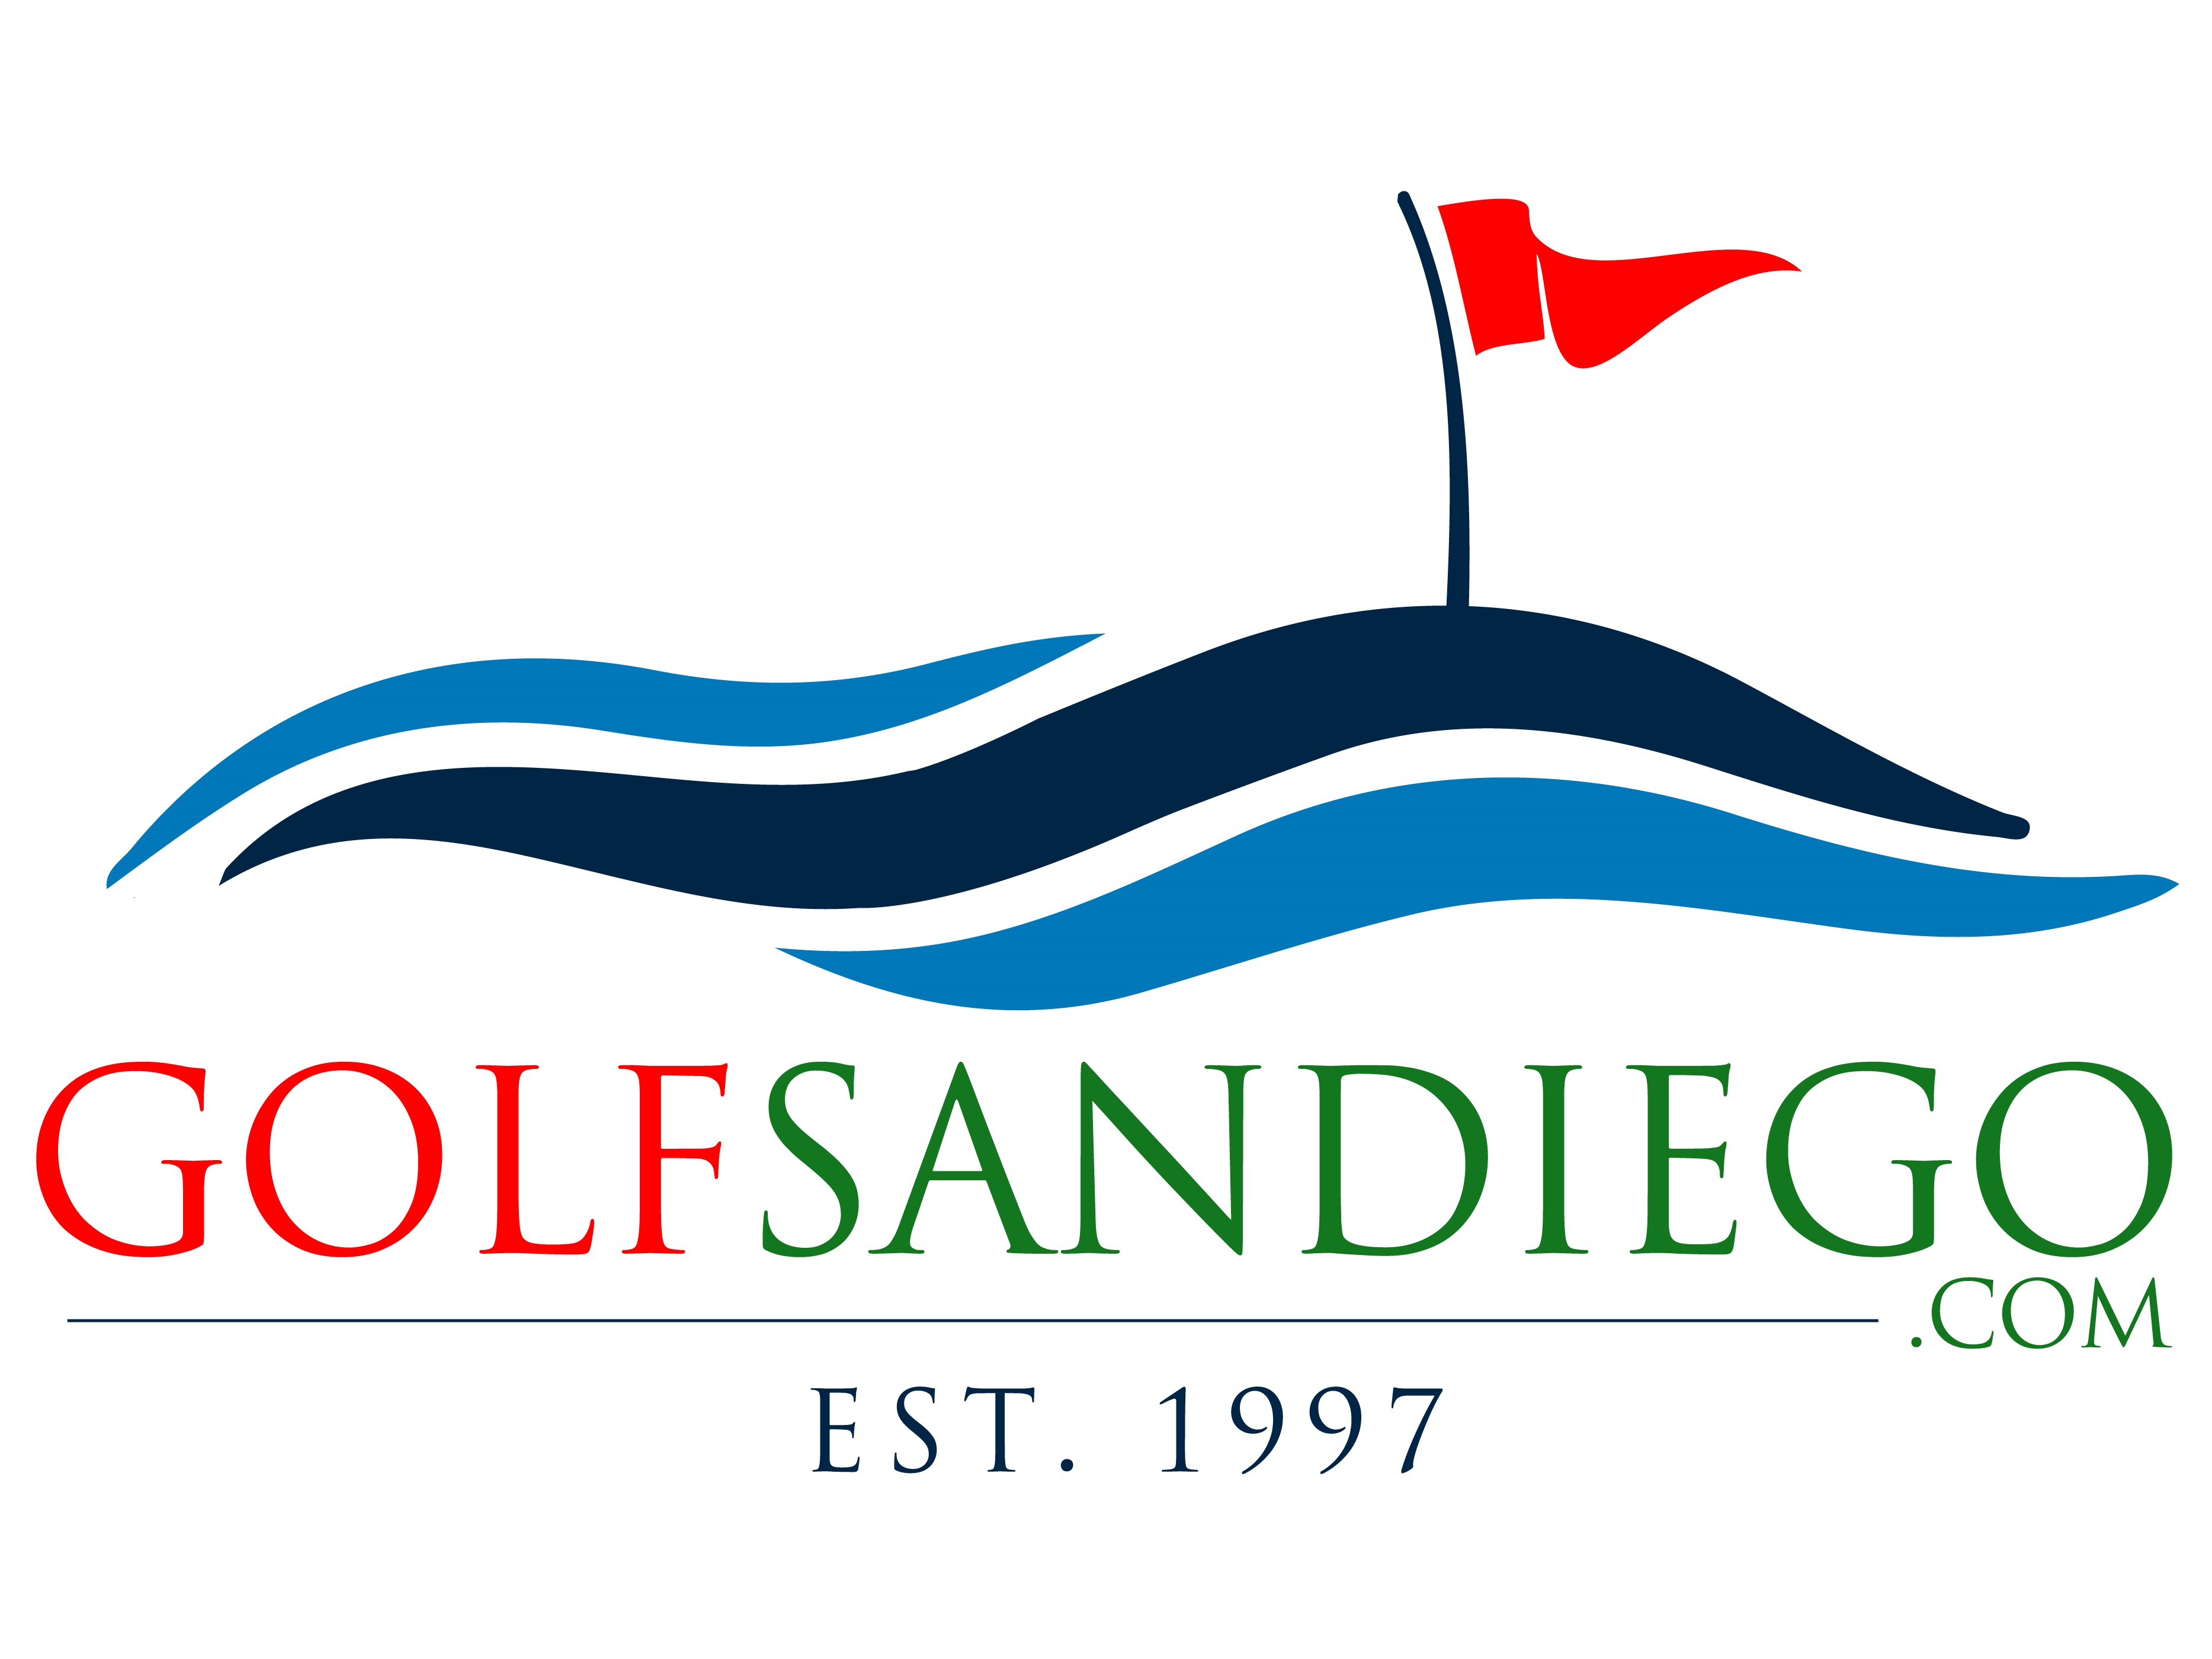 Golf San Diego - #1 for Tee Times and Golf Events